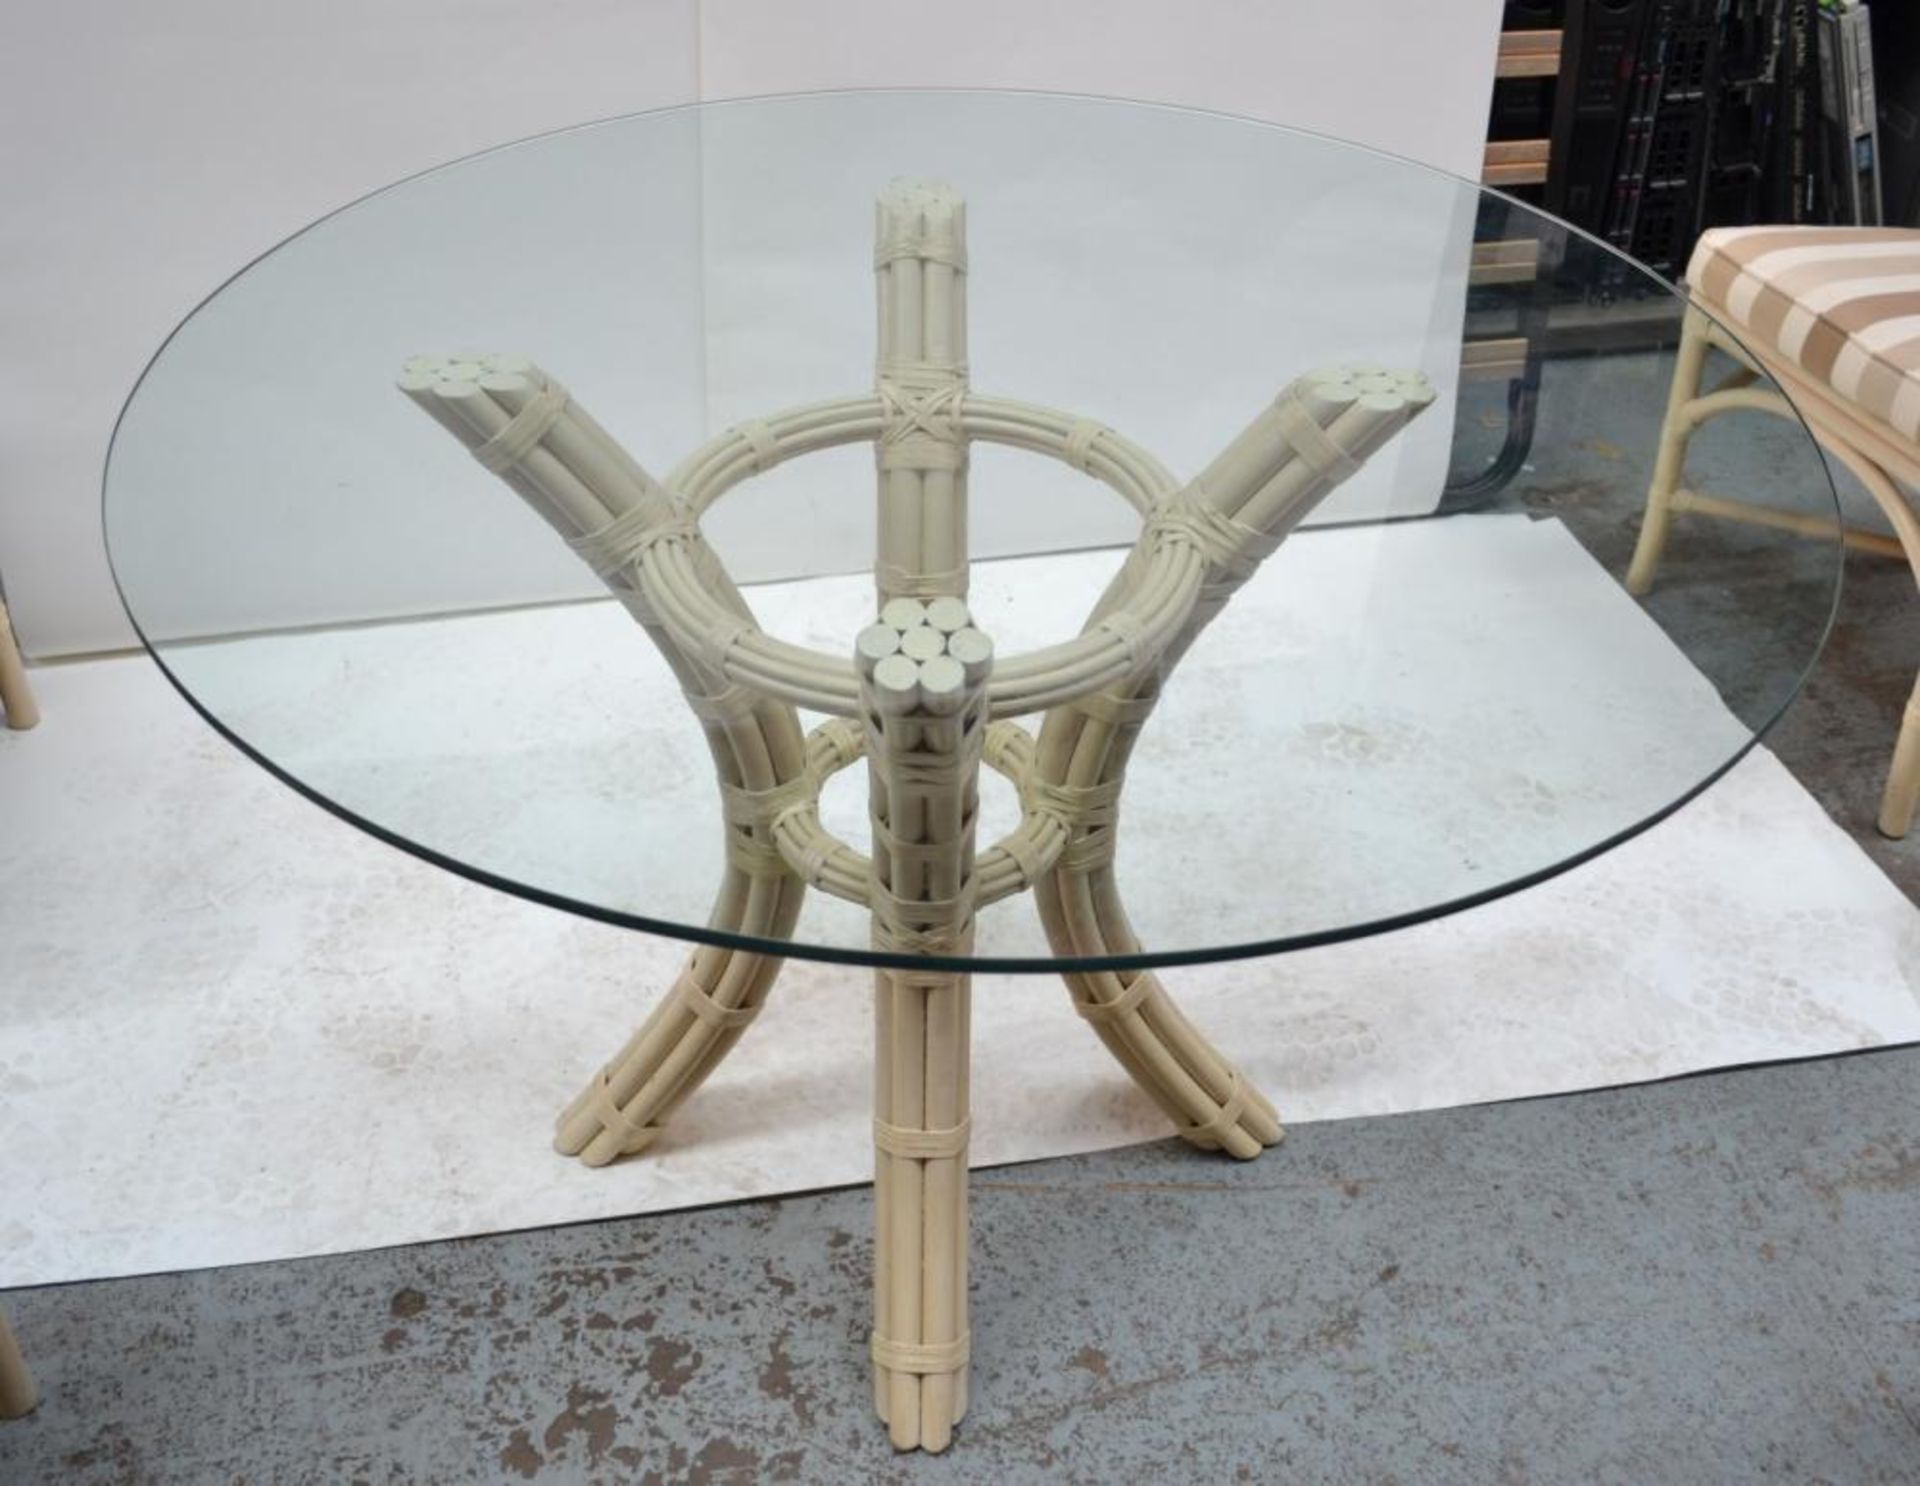 1 x Glass Topped Cane Table with 4 Chairs - Pre-owned In Good Condition - AE010 - CL007 - - Image 4 of 13